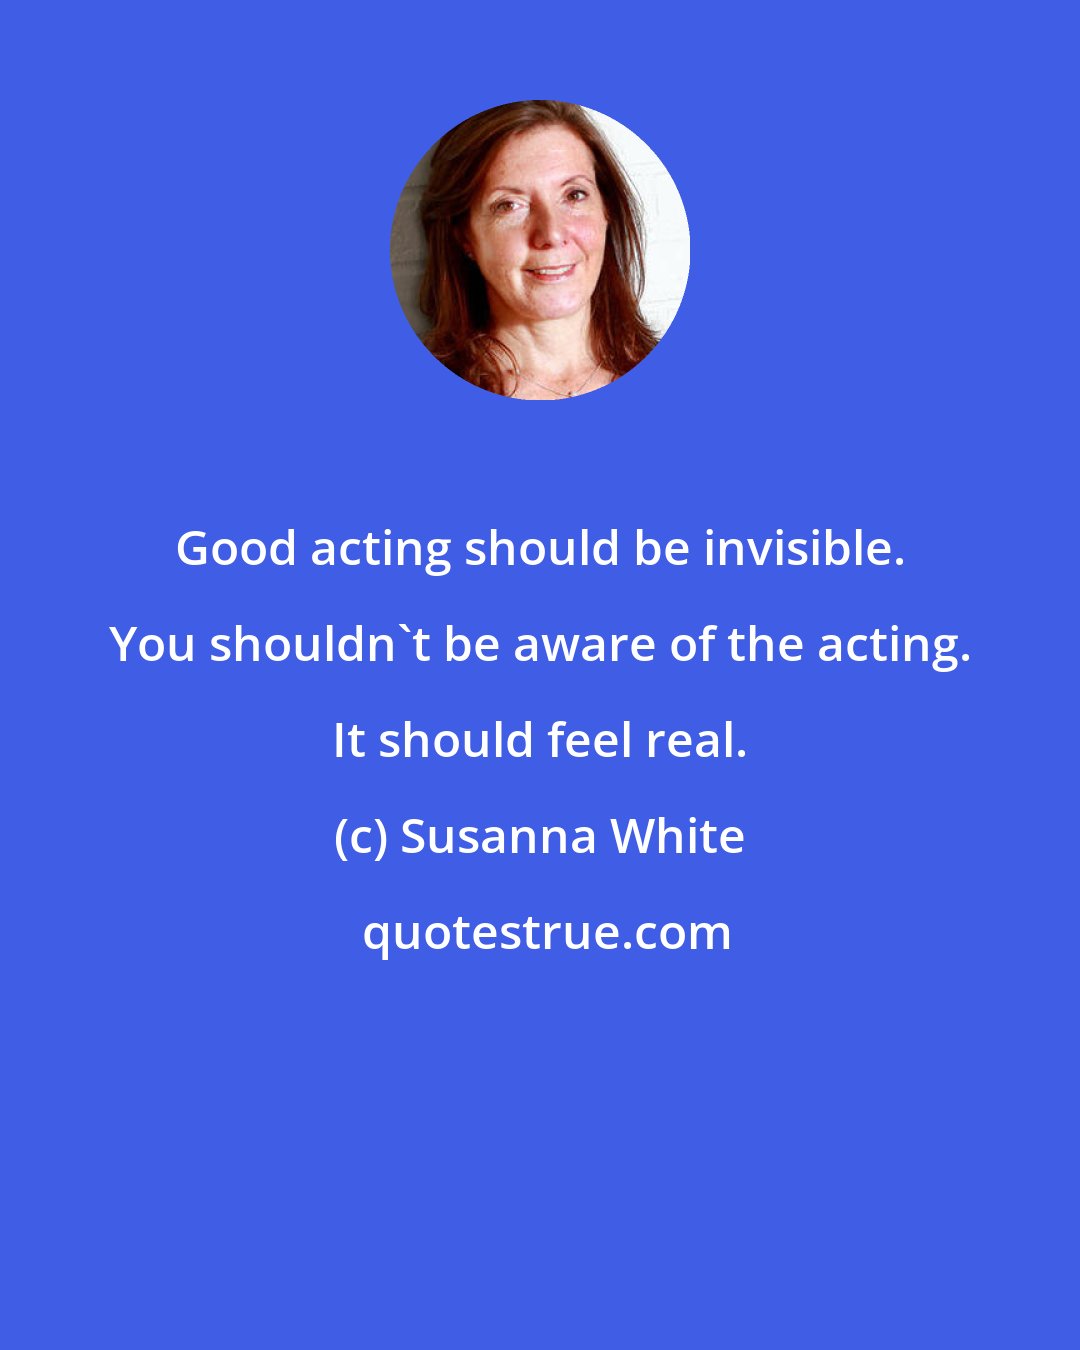 Susanna White: Good acting should be invisible. You shouldn't be aware of the acting. It should feel real.